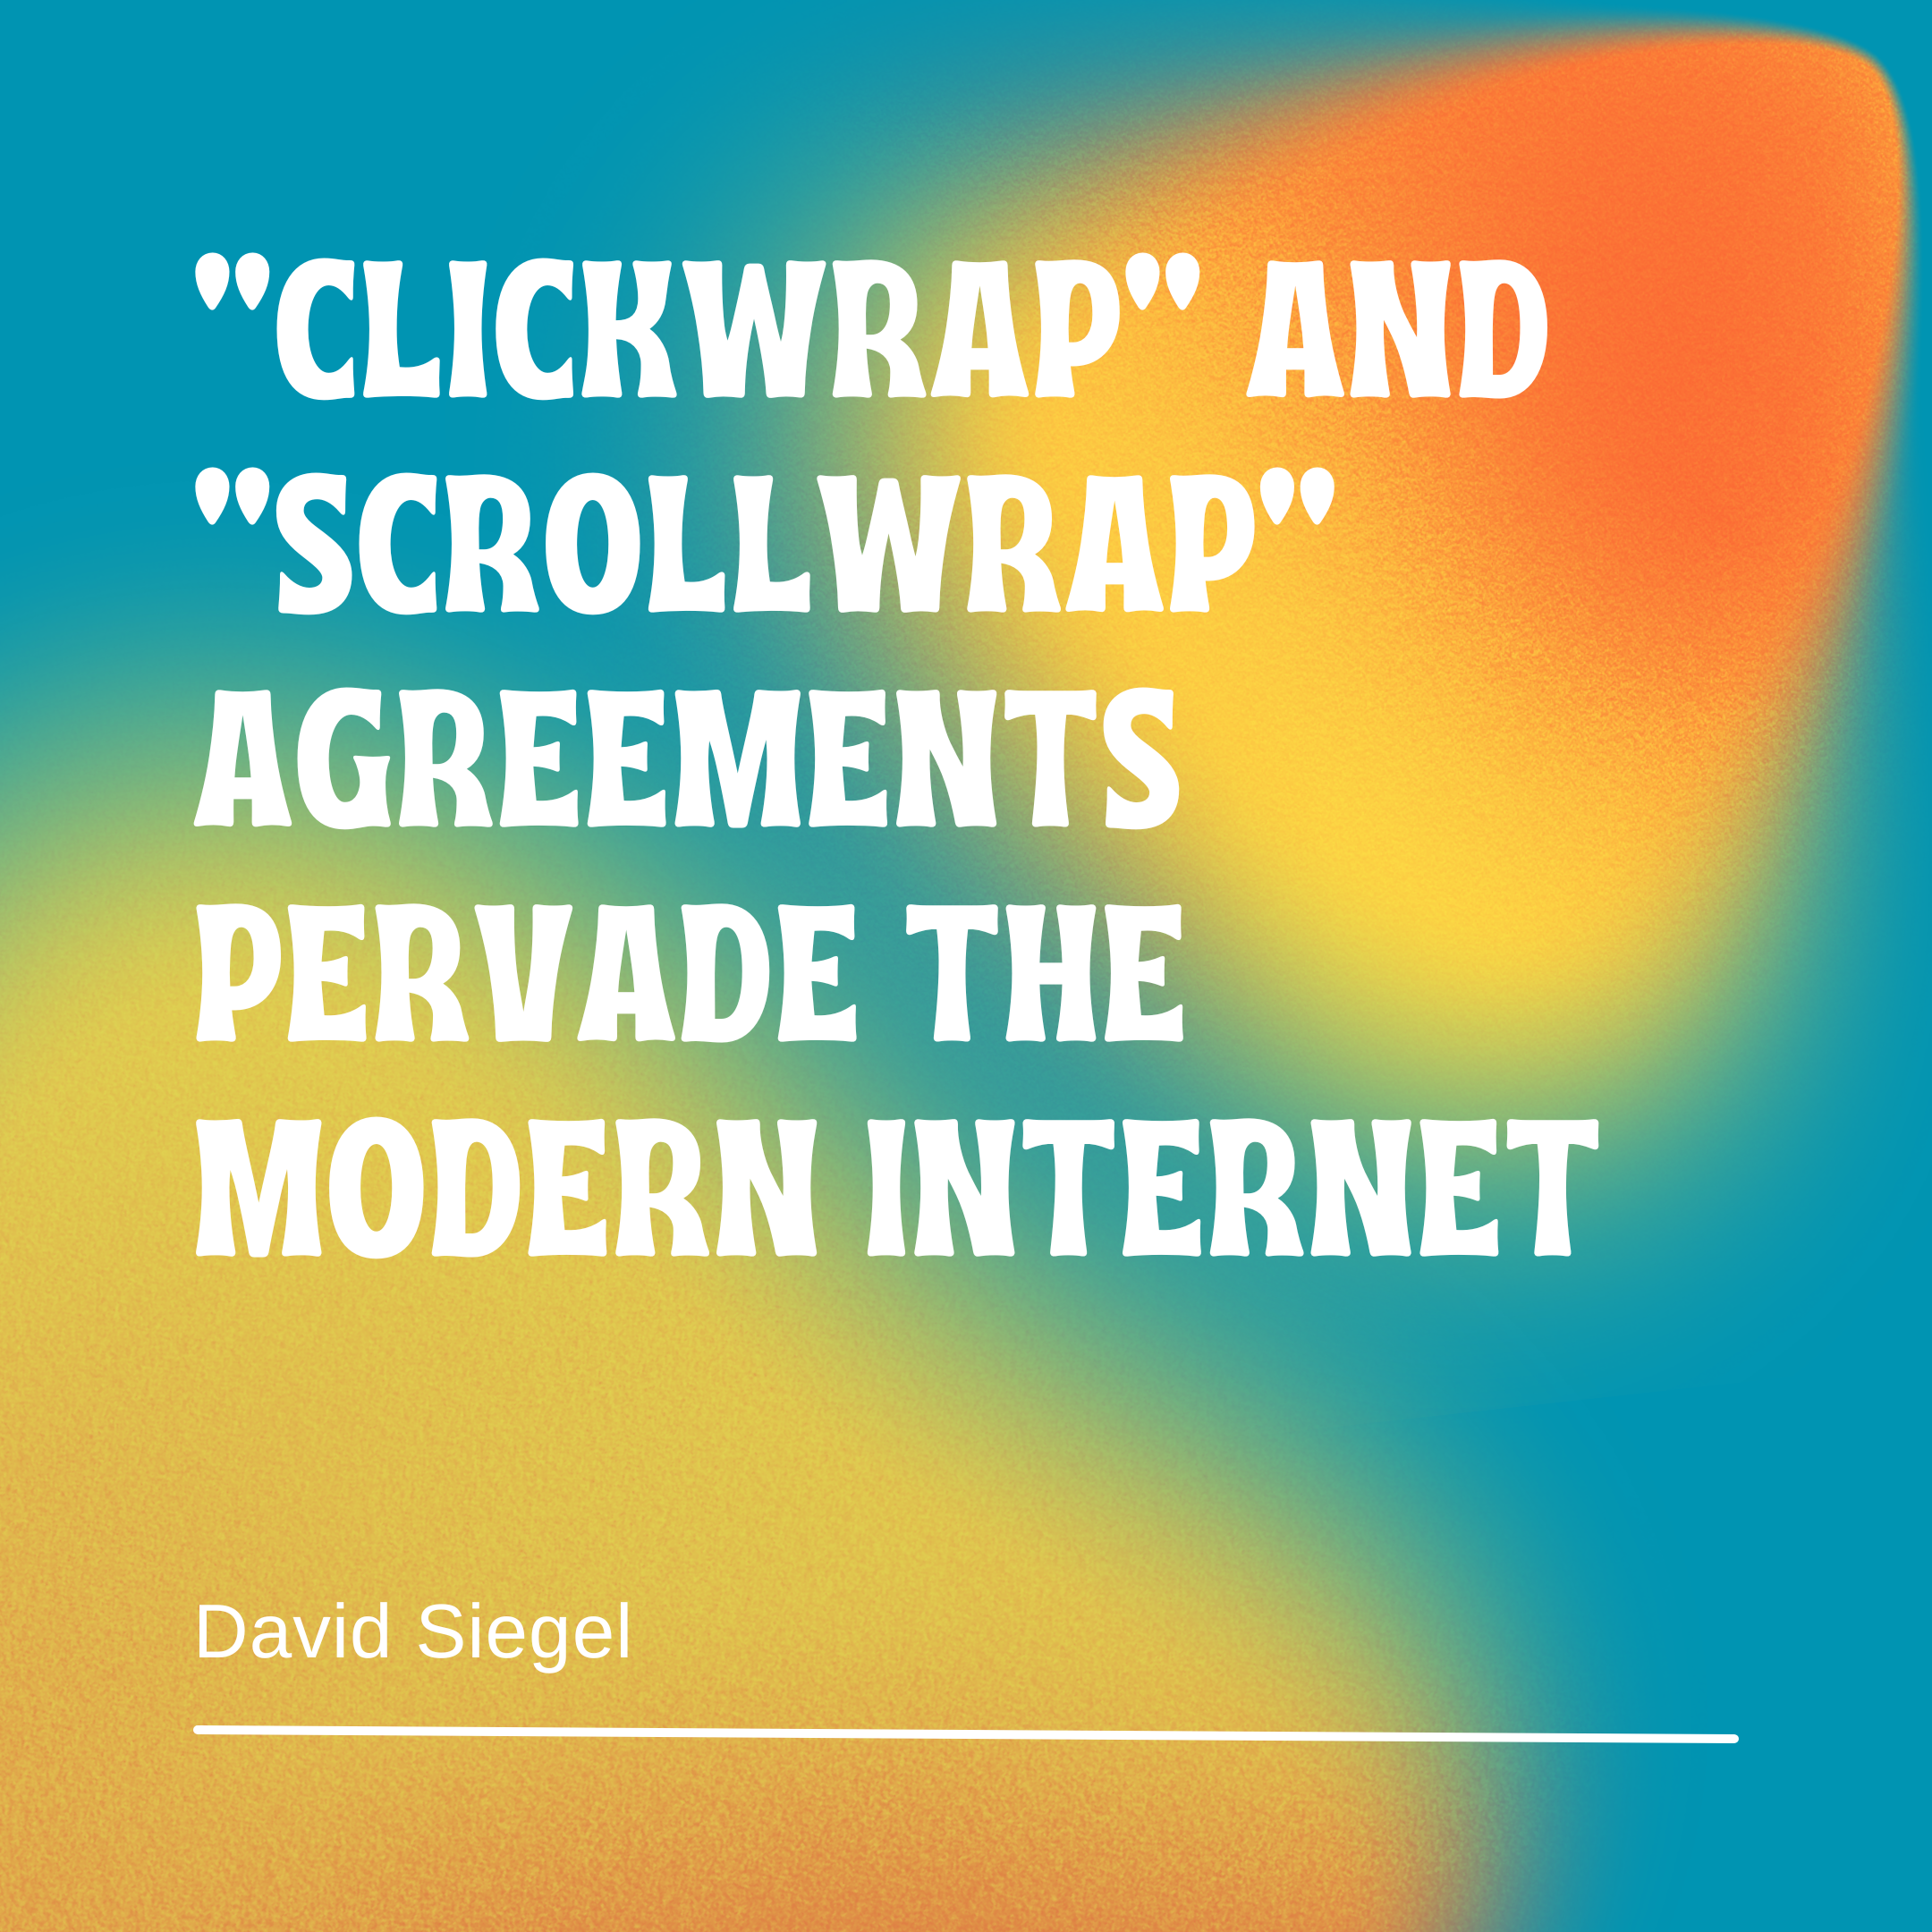 “Clickwrap” and “scrollwrap” agreements pervade the modern internet